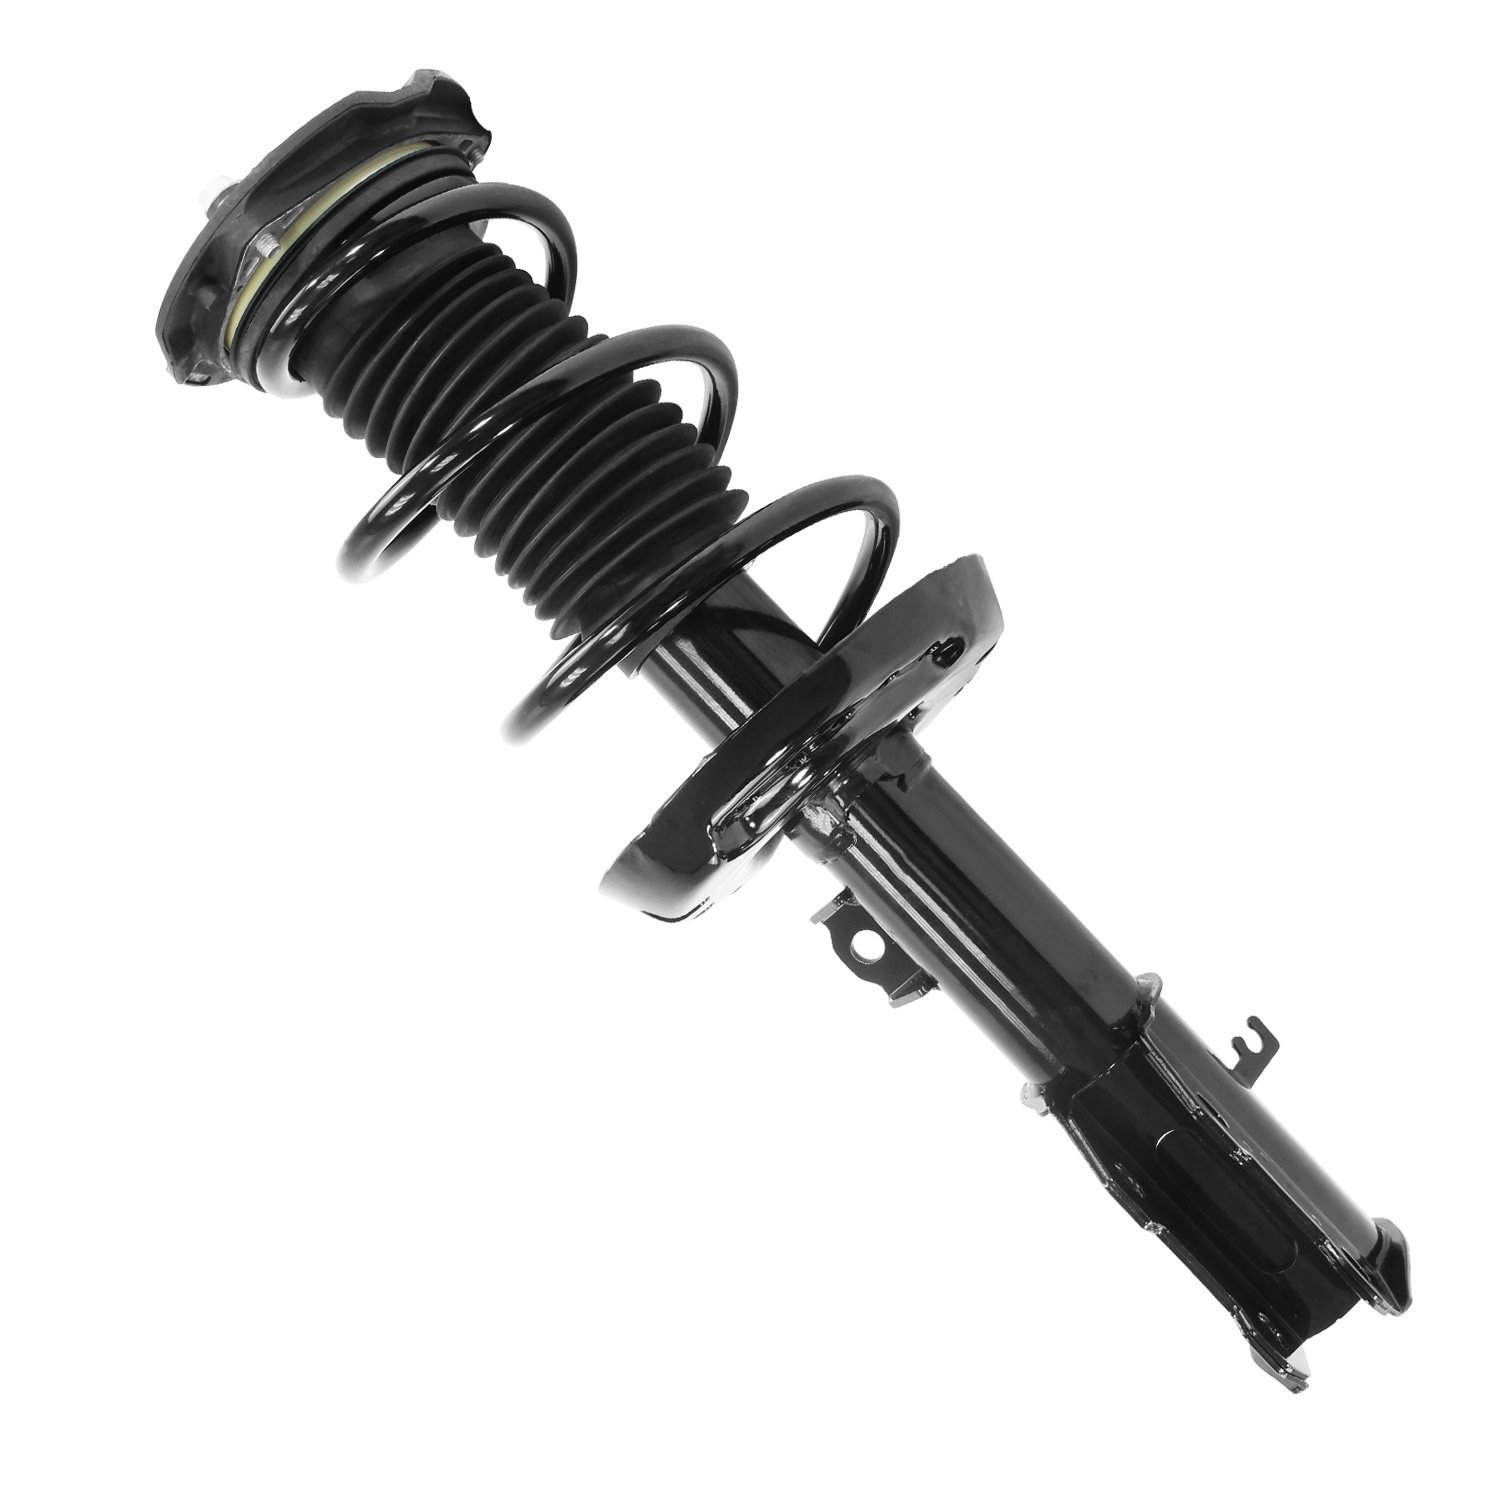 11887 Front Suspension Strut & Coil Spring Assemby Fits Select Chevy Cruze